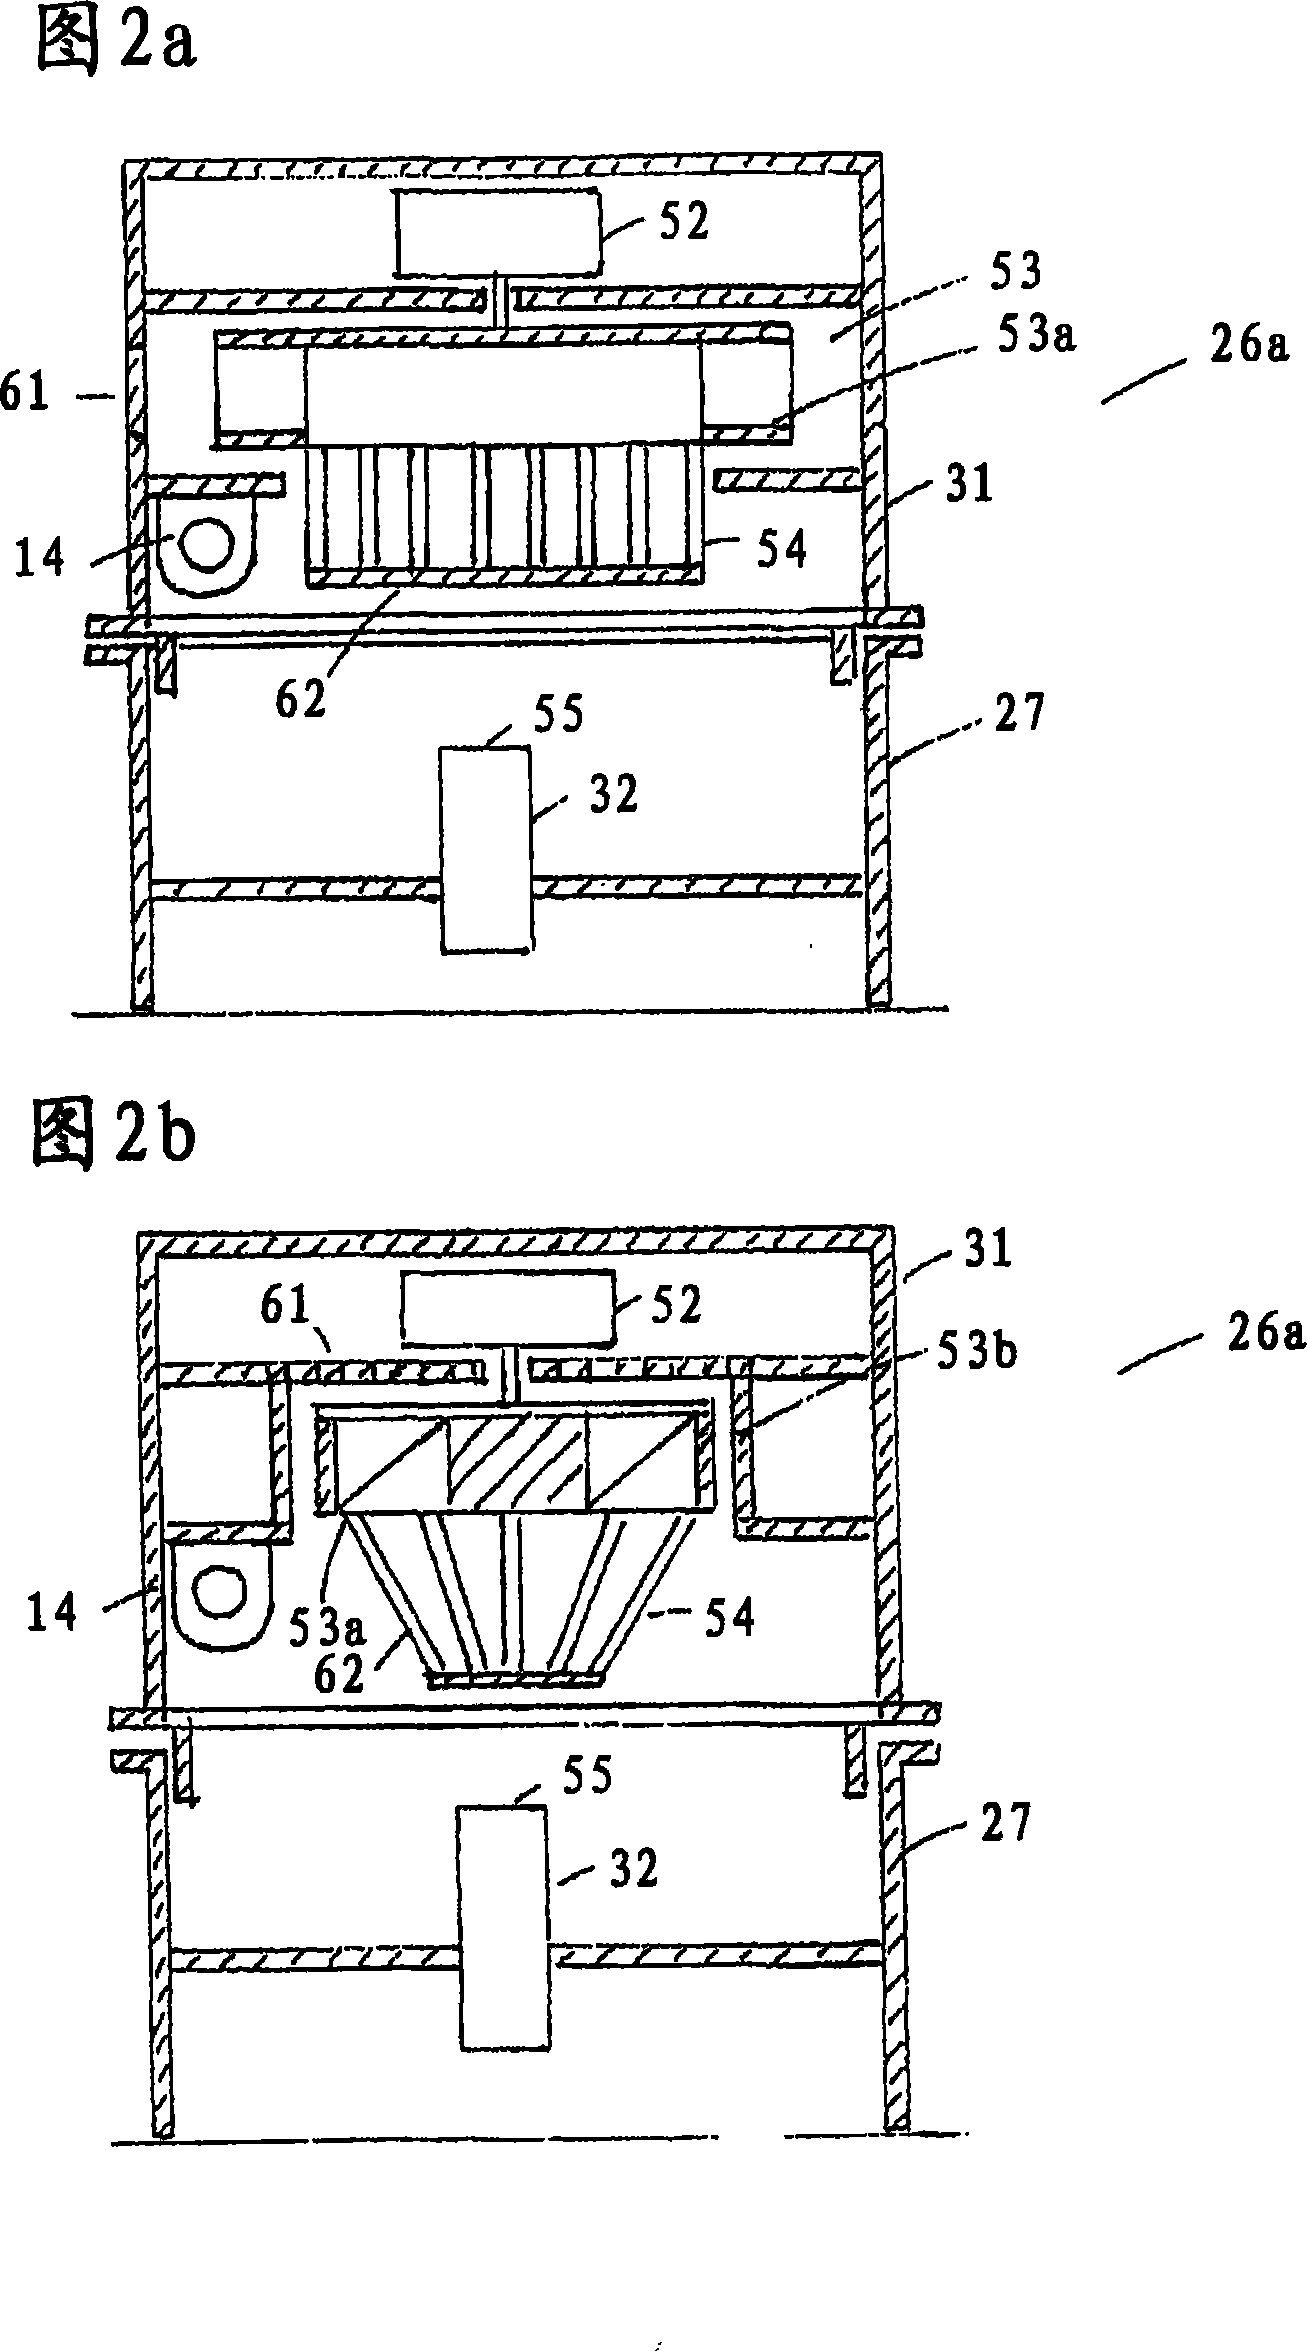 Cleaning and sterilizing apparatus combined with an ultra-violet lamp